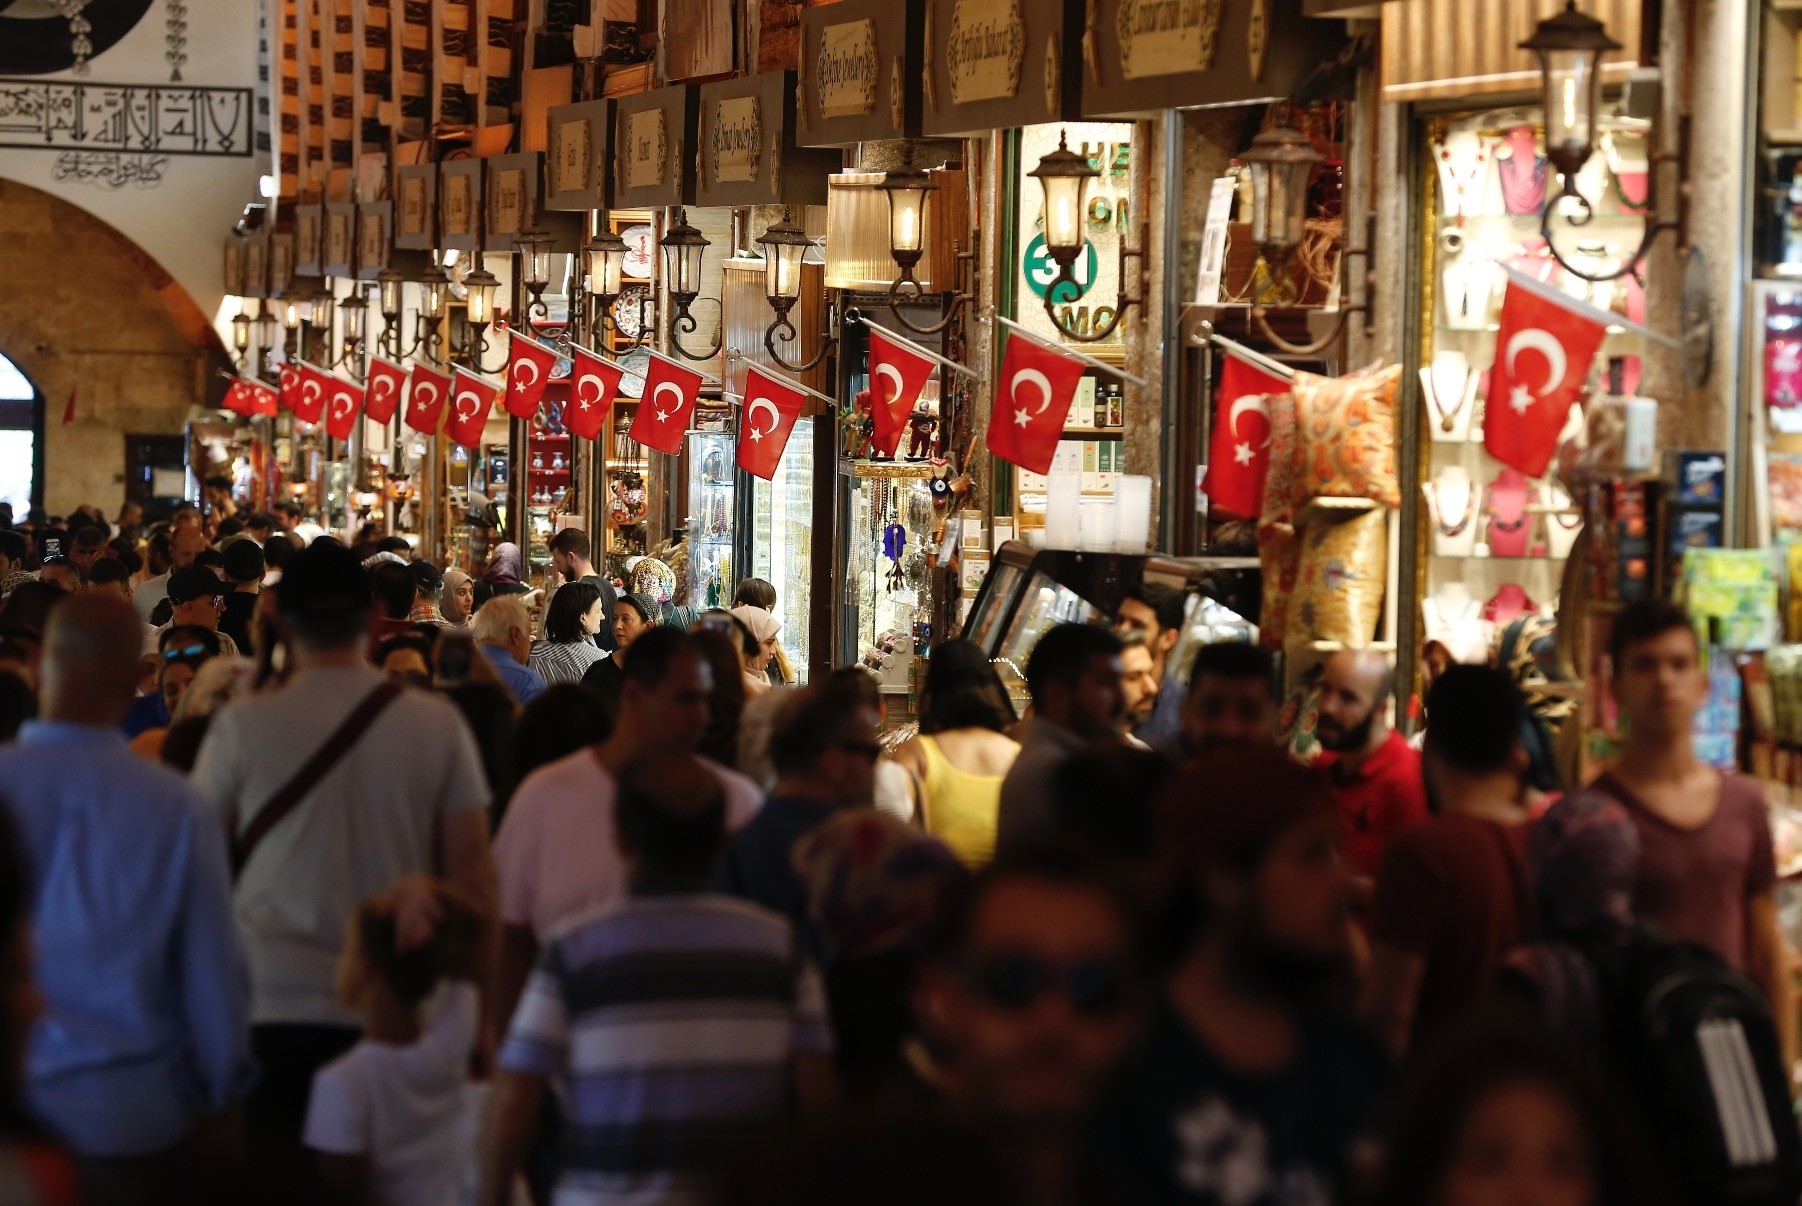 Tourists walk in a historical covered bazaar in Istanbul on Aug. 20, the first day of the nine-day Qurban Bayram (Eid al-Adha) holiday, which ended Sunday. The holiday saw a great increase in the number of local and foreign tourists. 